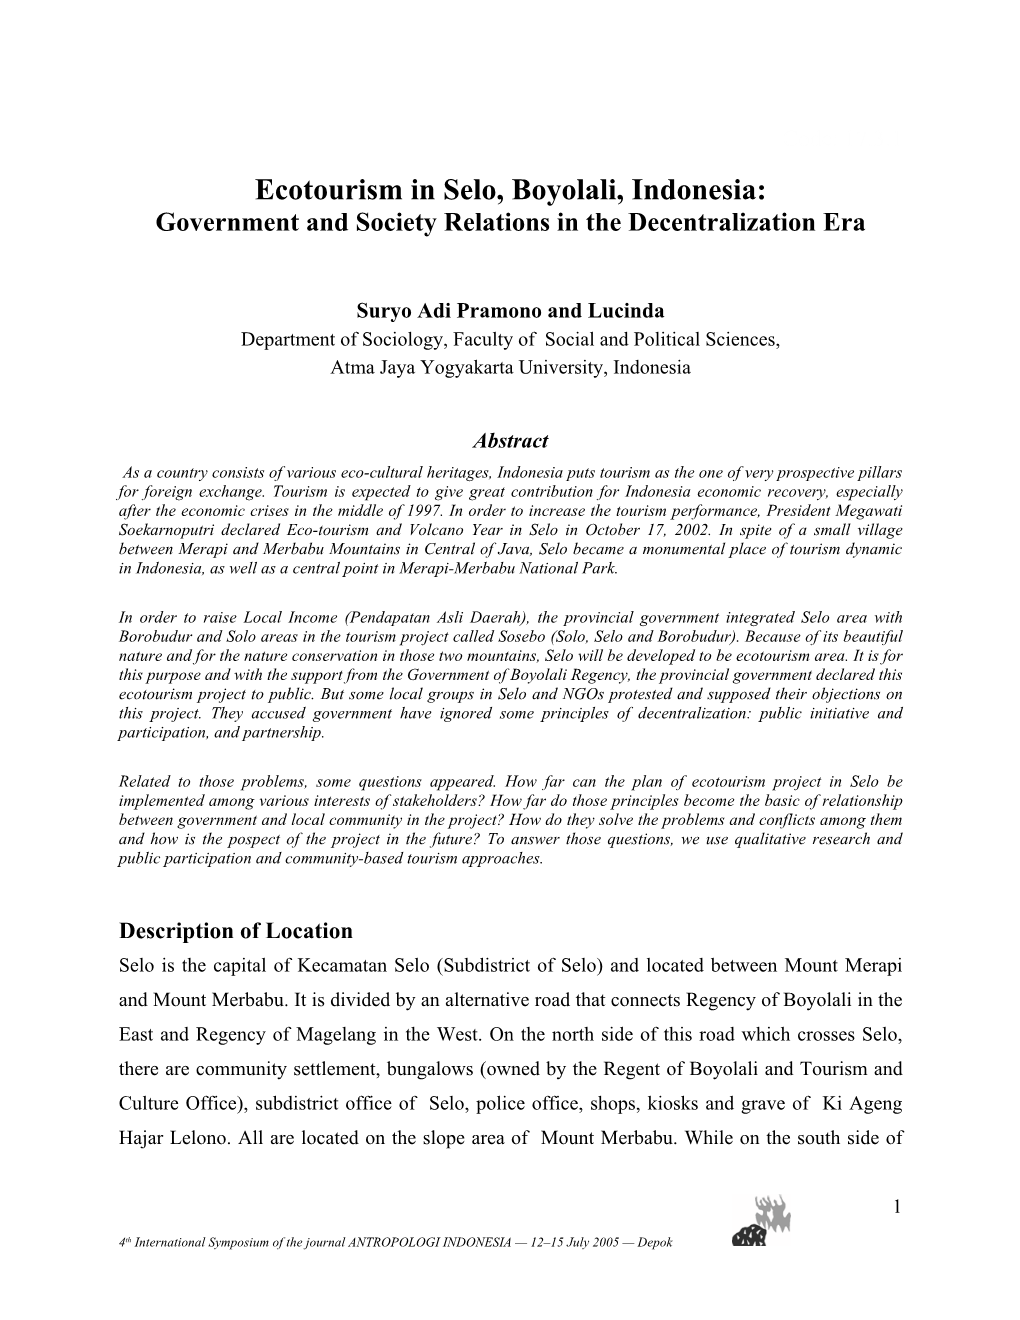 Ecotourism in Selo, Boyolali, Indonesia: Government and Society Relations in the Decentralization Era